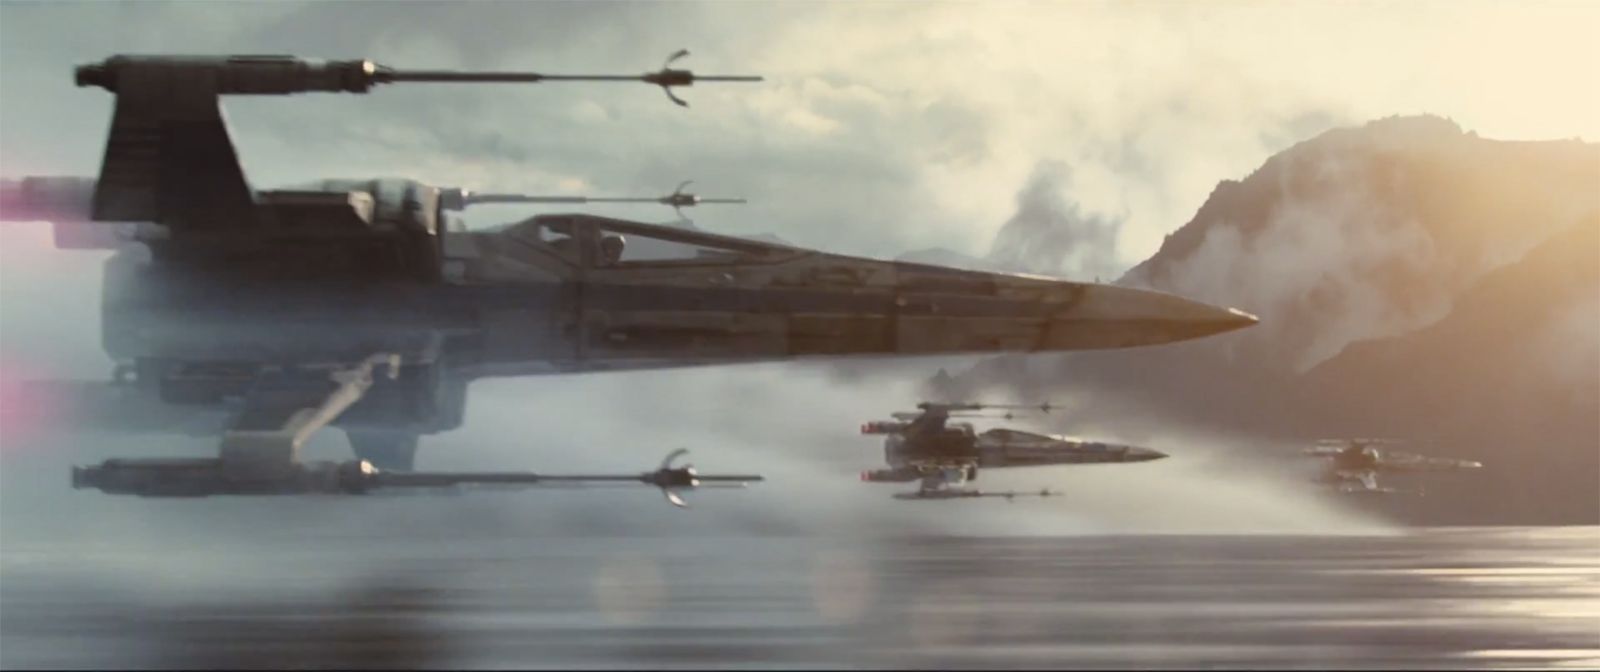 star wars episode vii the force awakens trailer dares you to hope for great things image 1